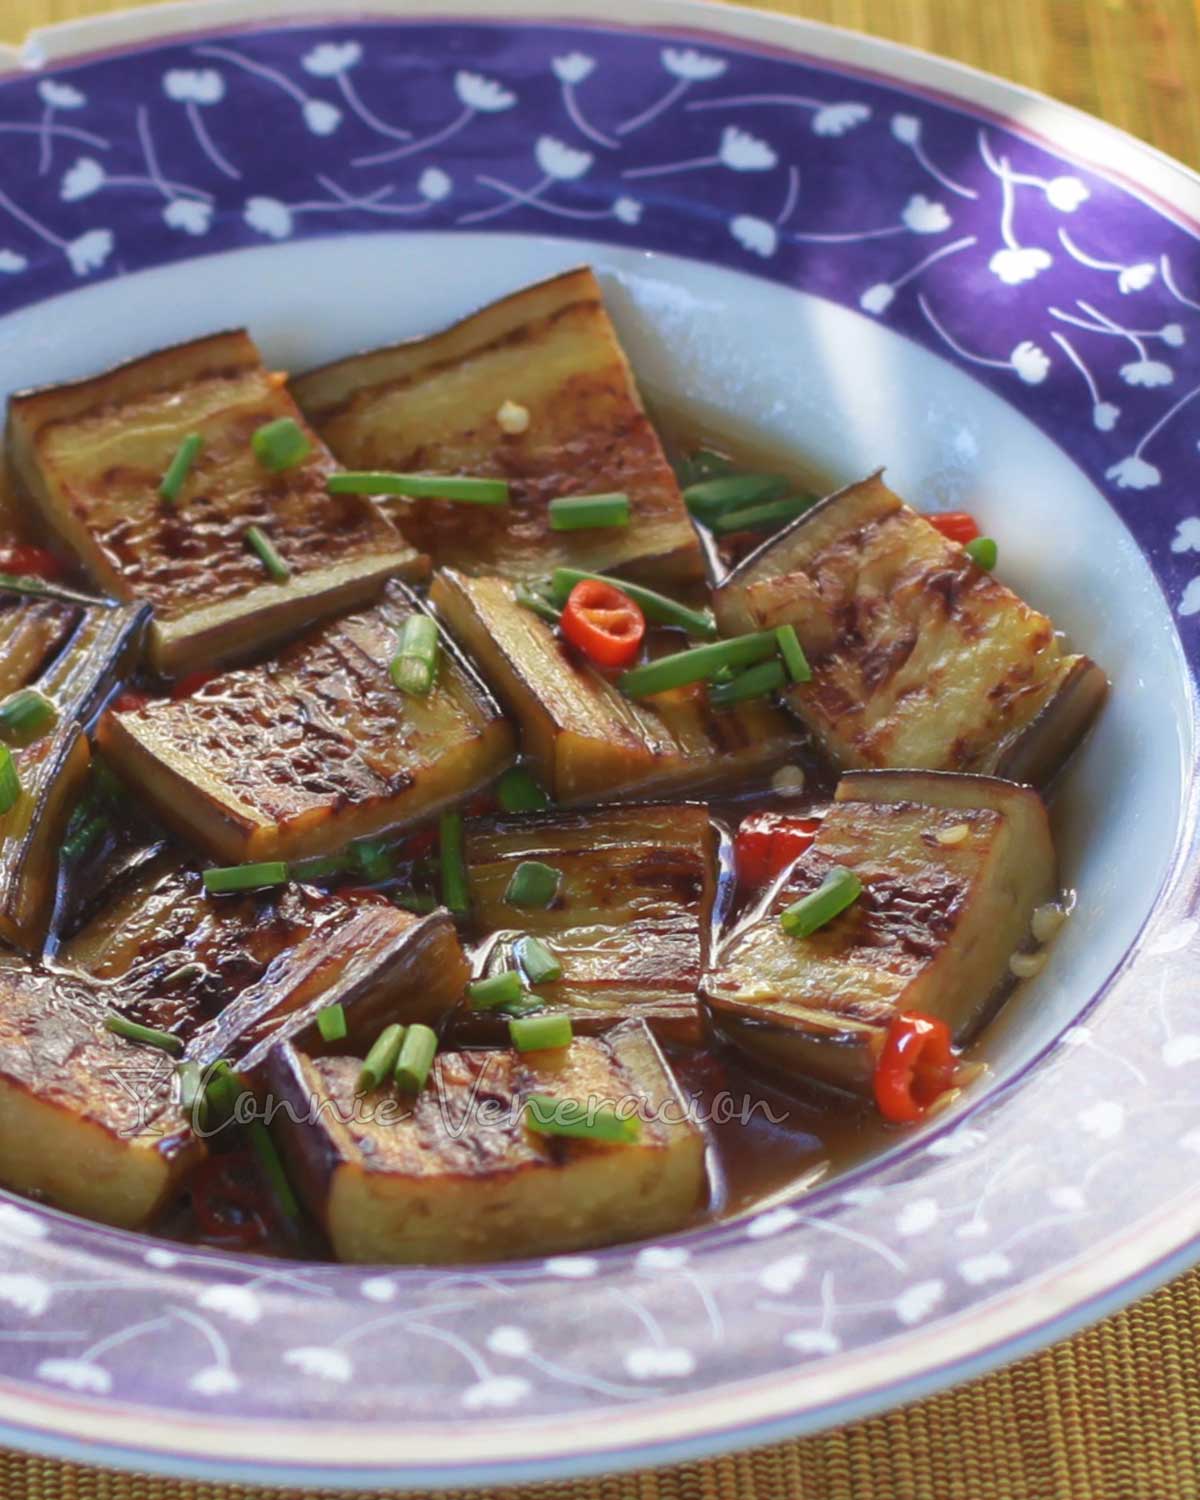 Pan-grilled eggplant with sweet chili sauce